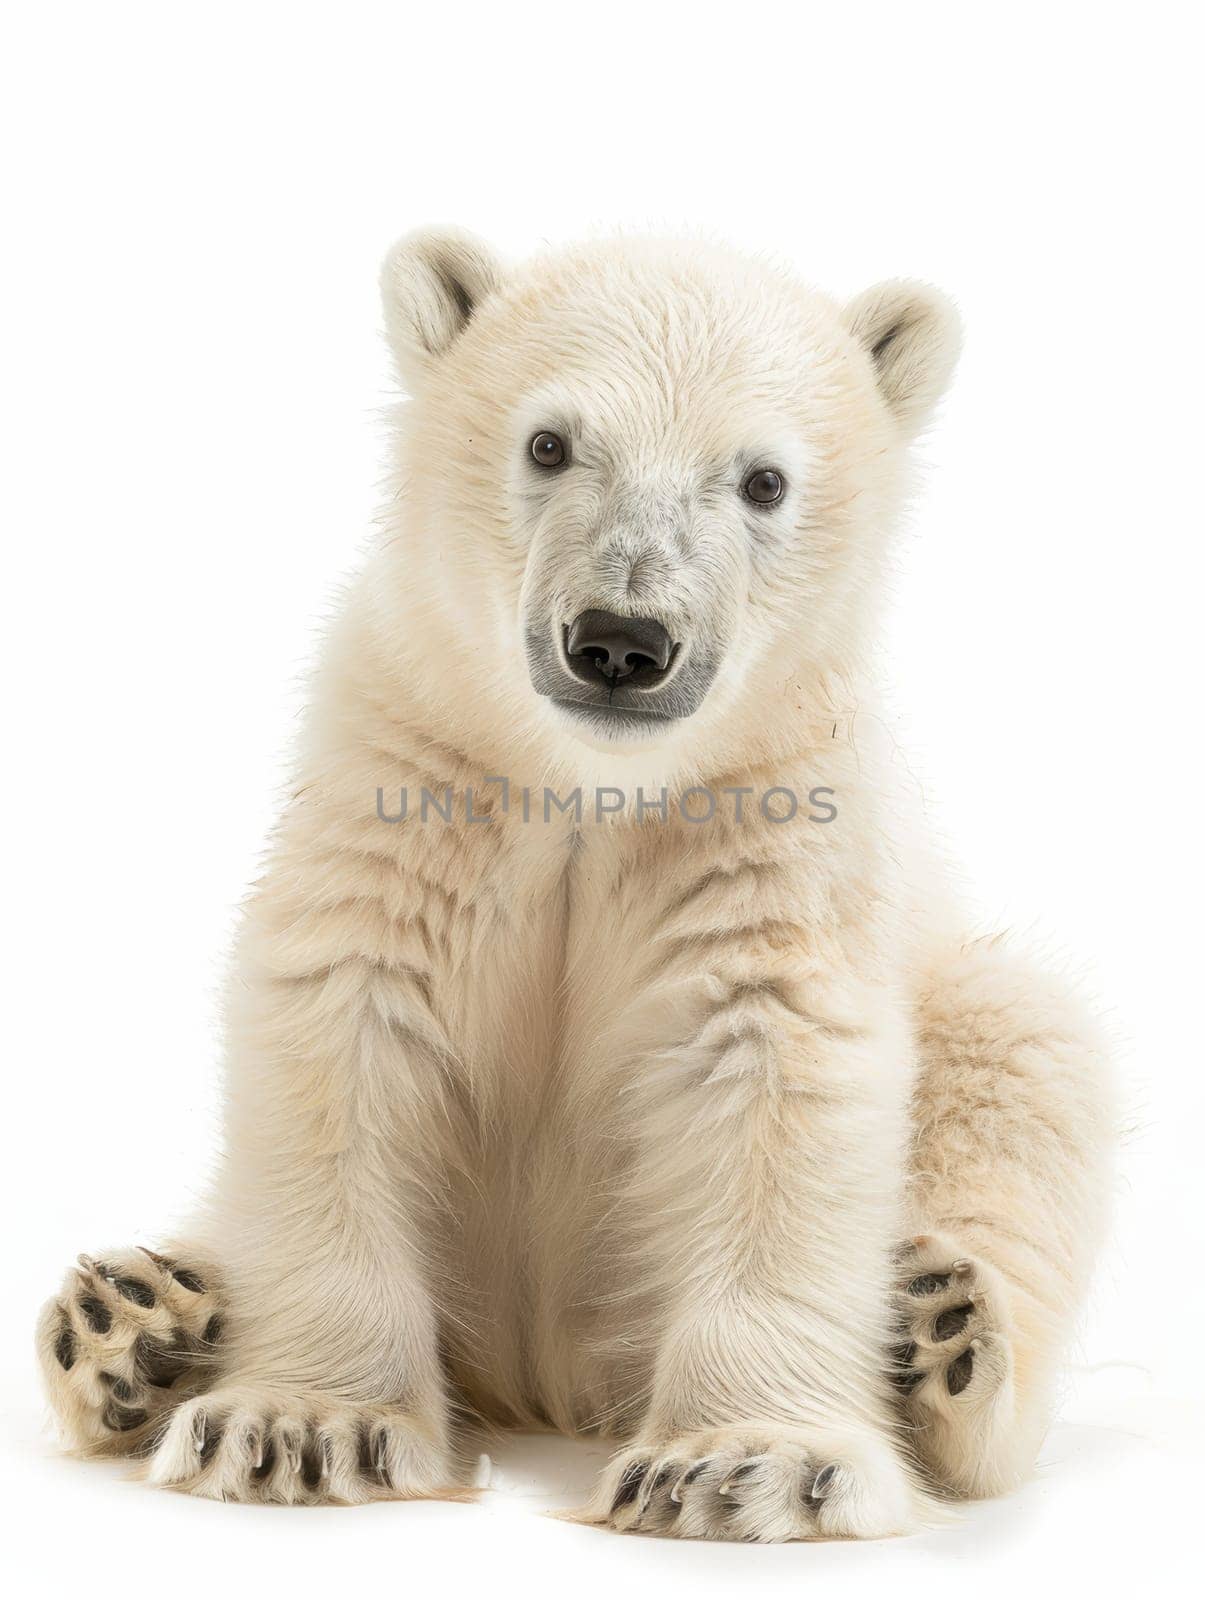 This inquisitive polar bear cub sits upright on a white backdrop, its bright eyes conveying a sense of wonder and curiosity. Animal isolated on white background. by sfinks